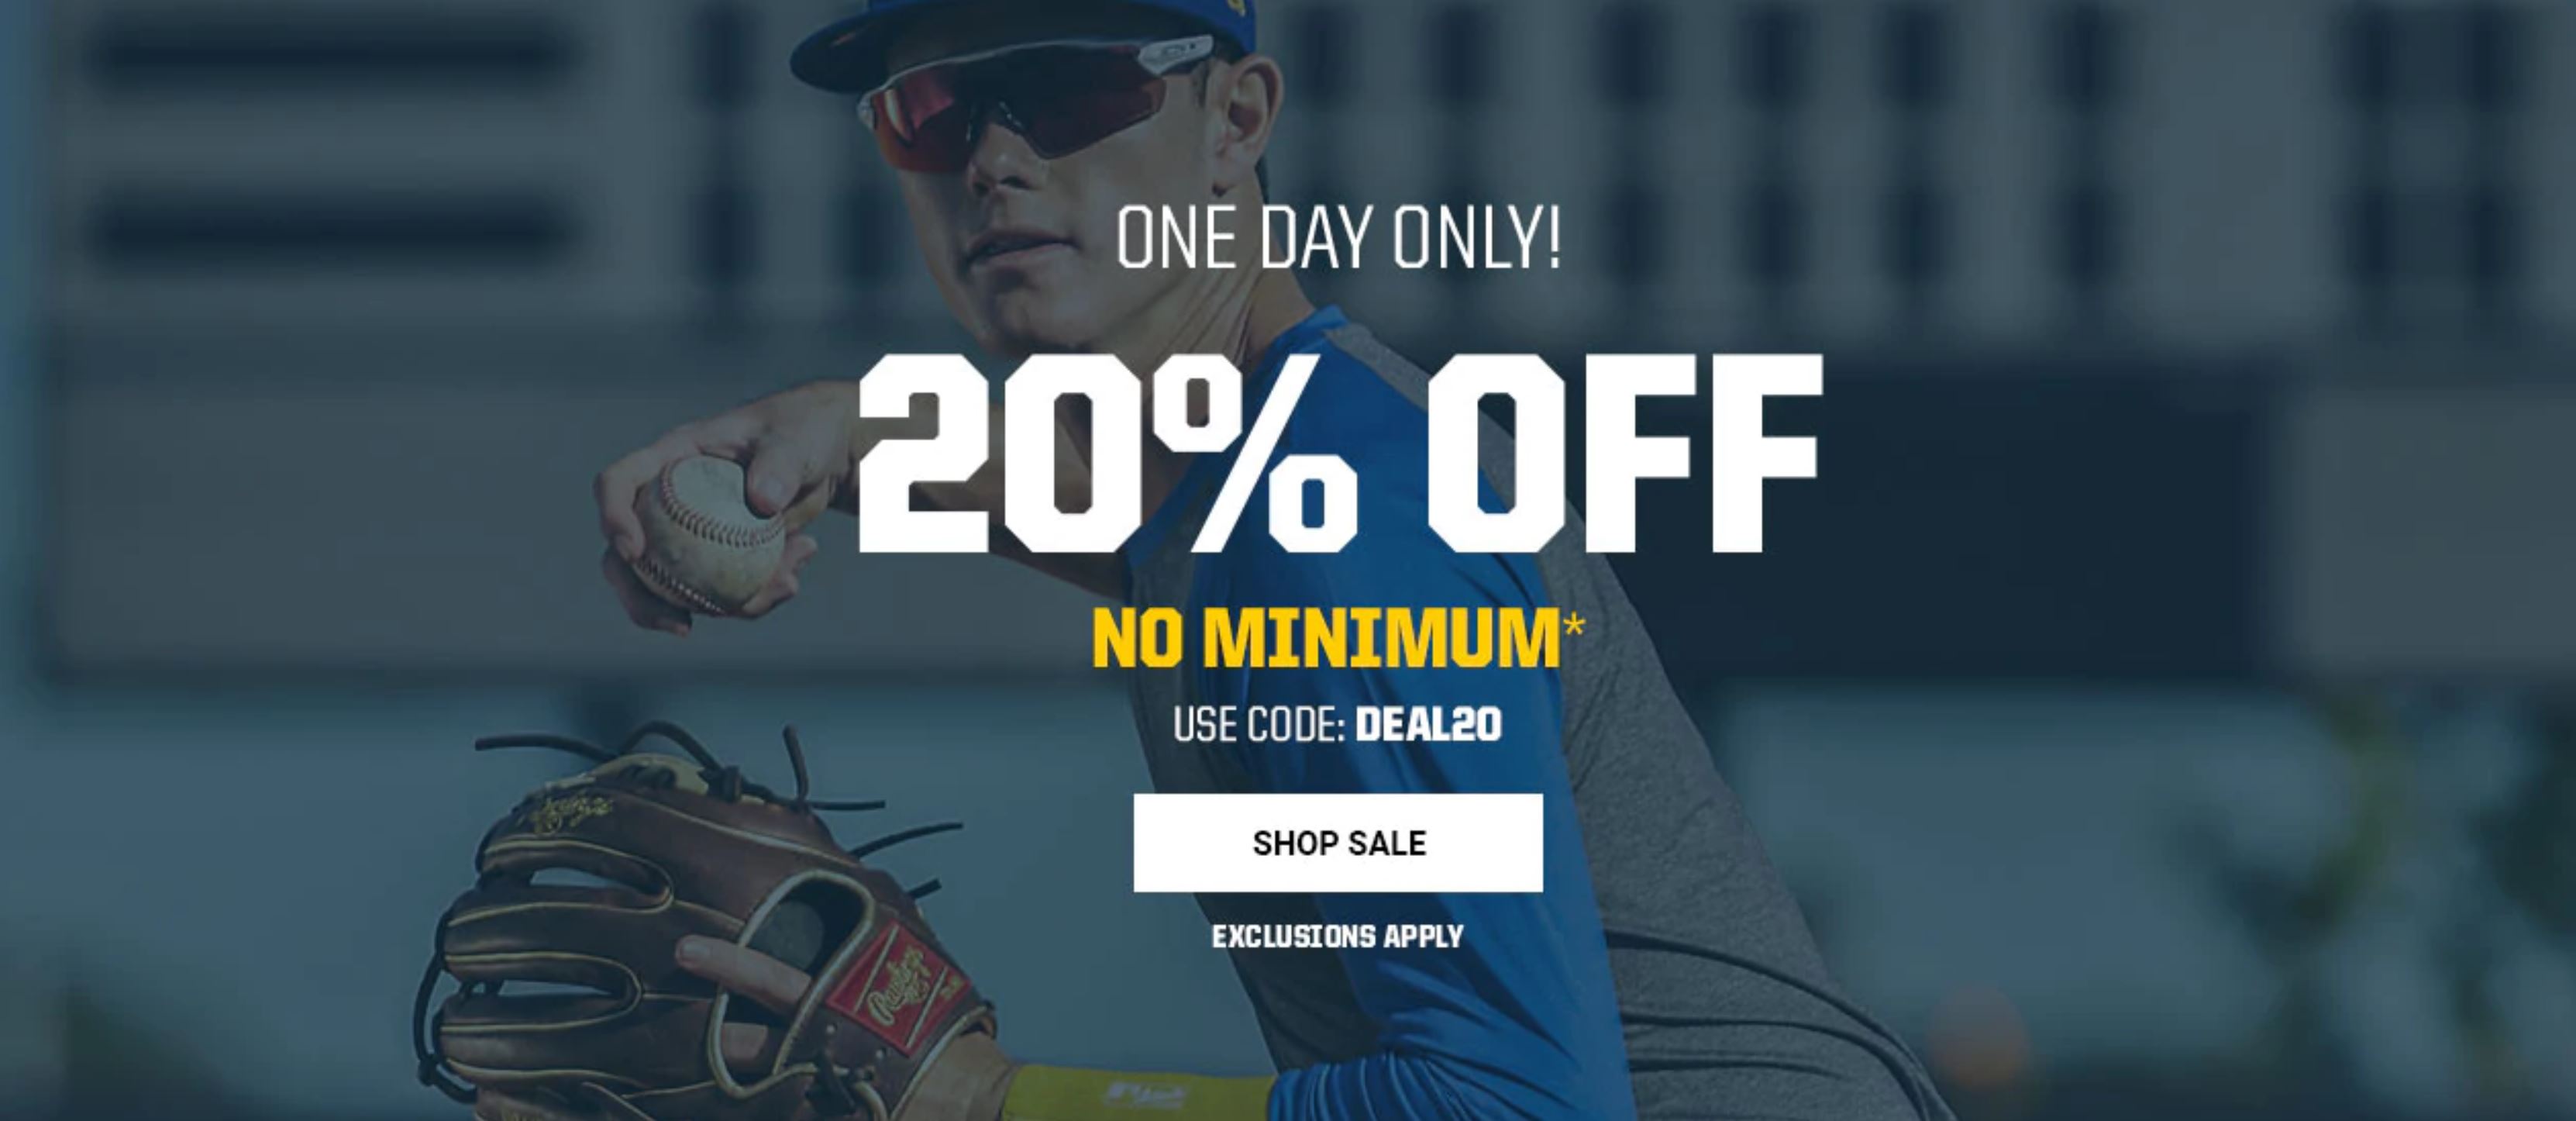 eastbay 20% off